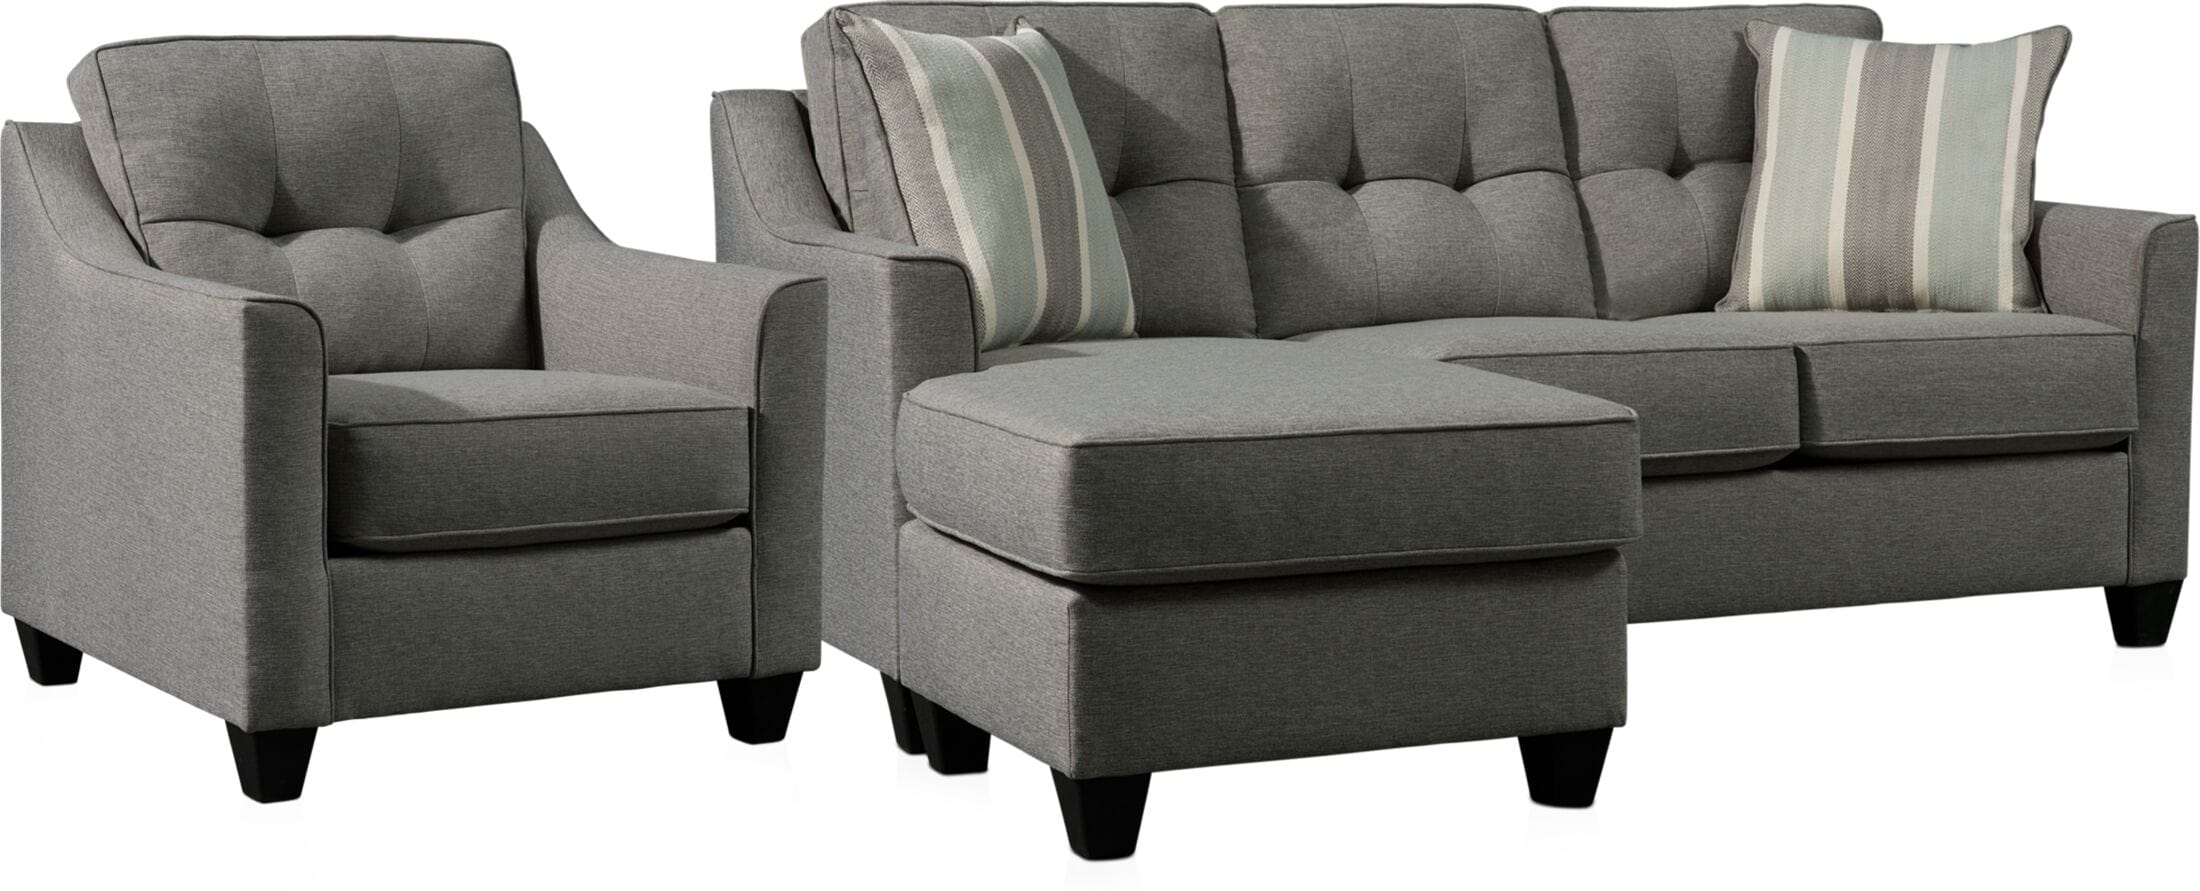 Monica Sofa With Chaise And Chair